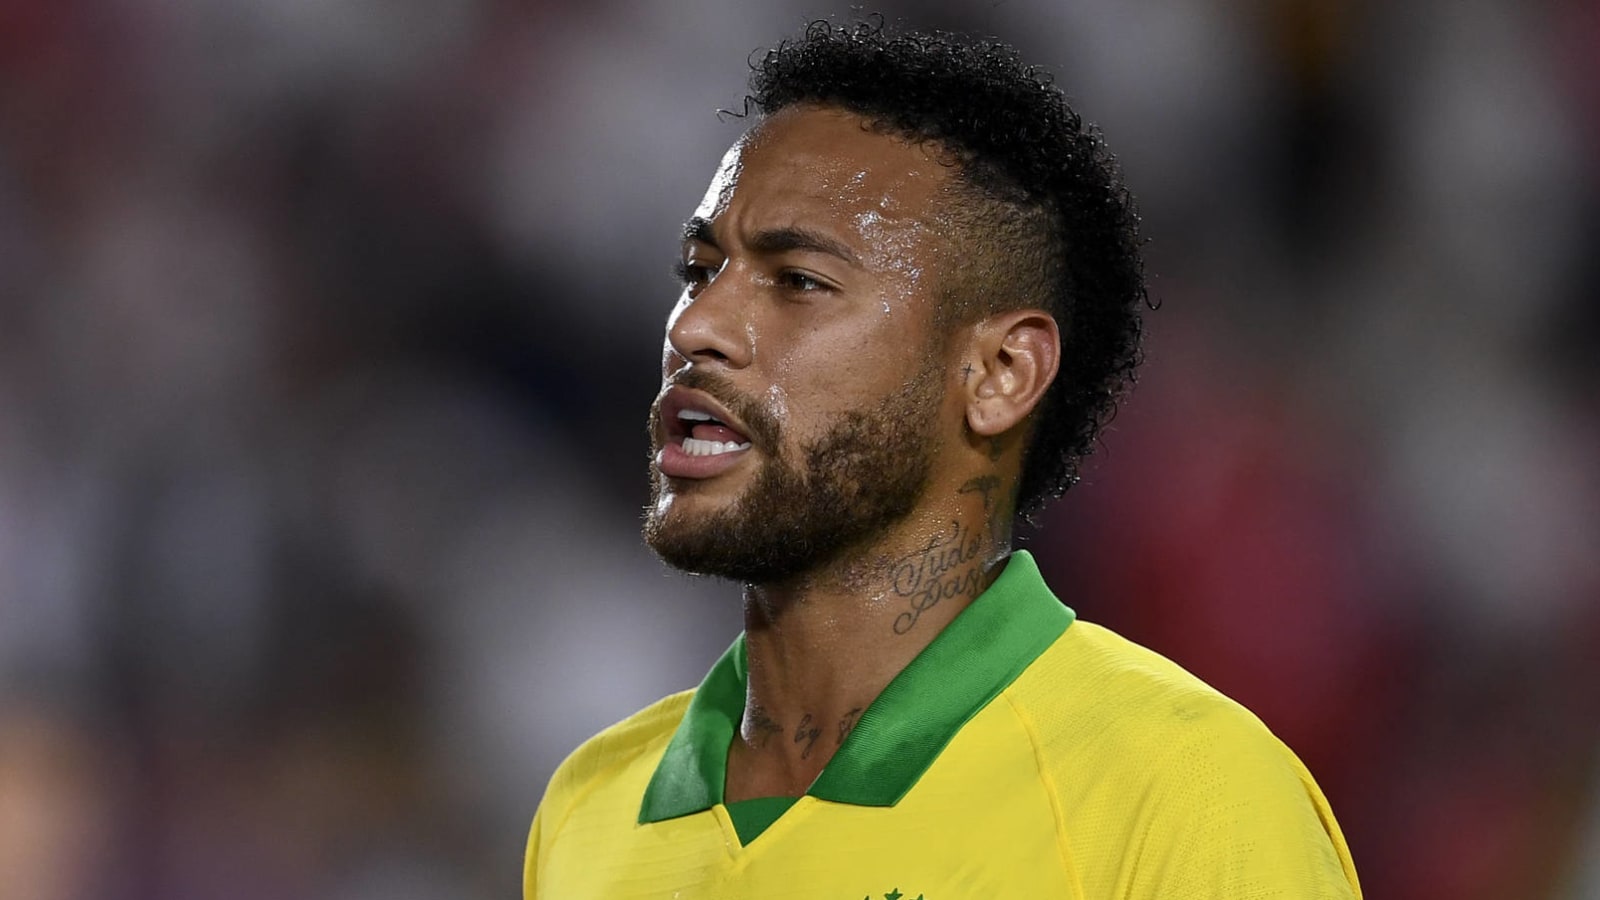 Neymar stretchered off with ankle injury in loss to Lyon